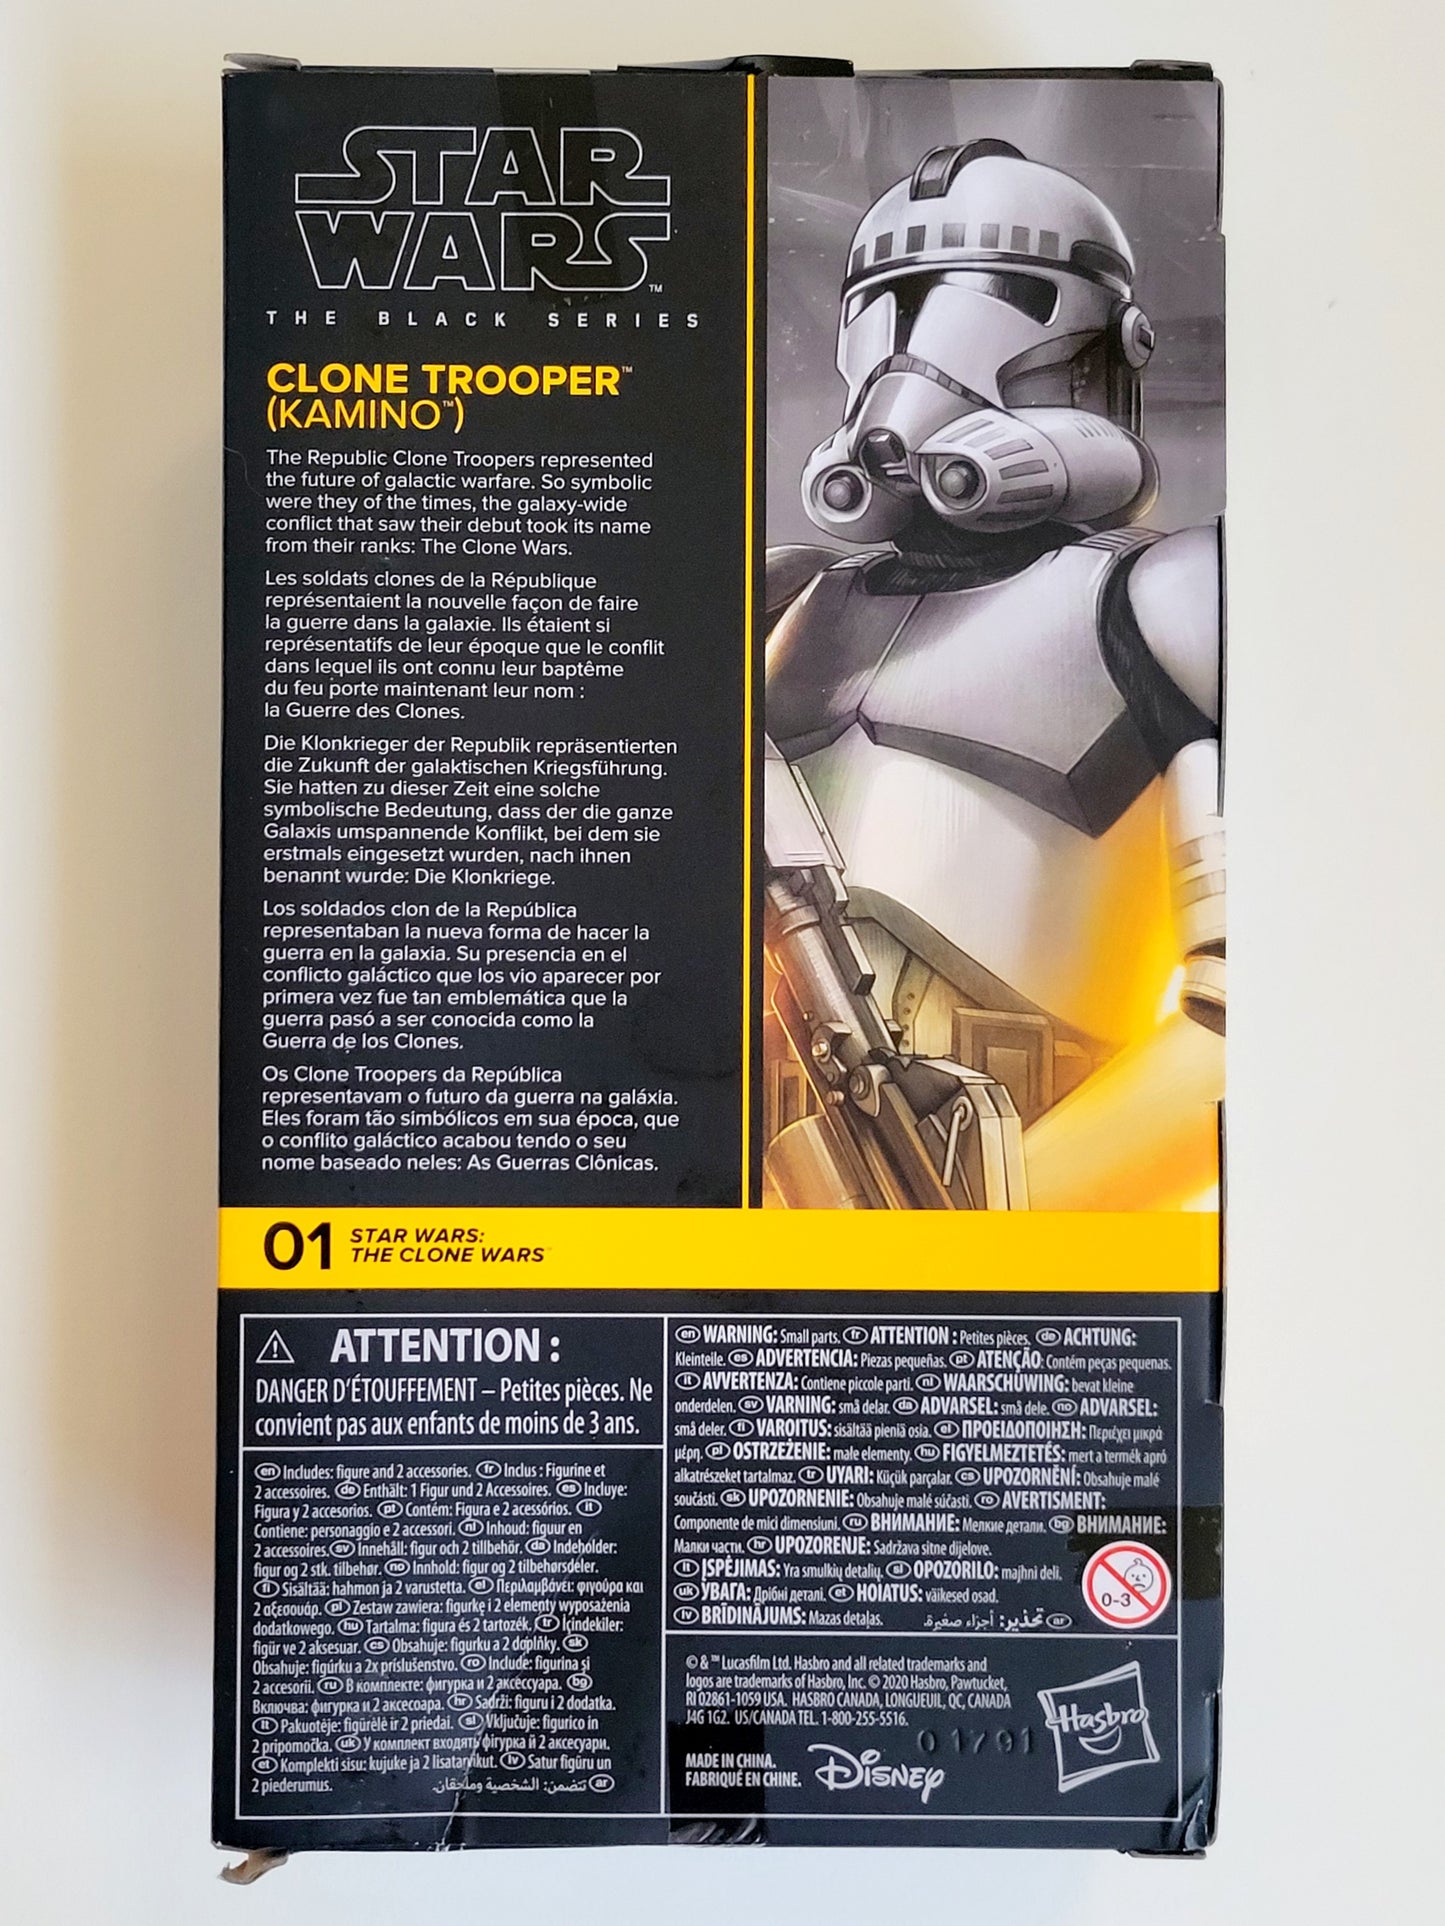 Star Wars: The Black Series Clone Trooper (Kamino) 6-Inch Action Figure from Star Wars: The Clone Wars